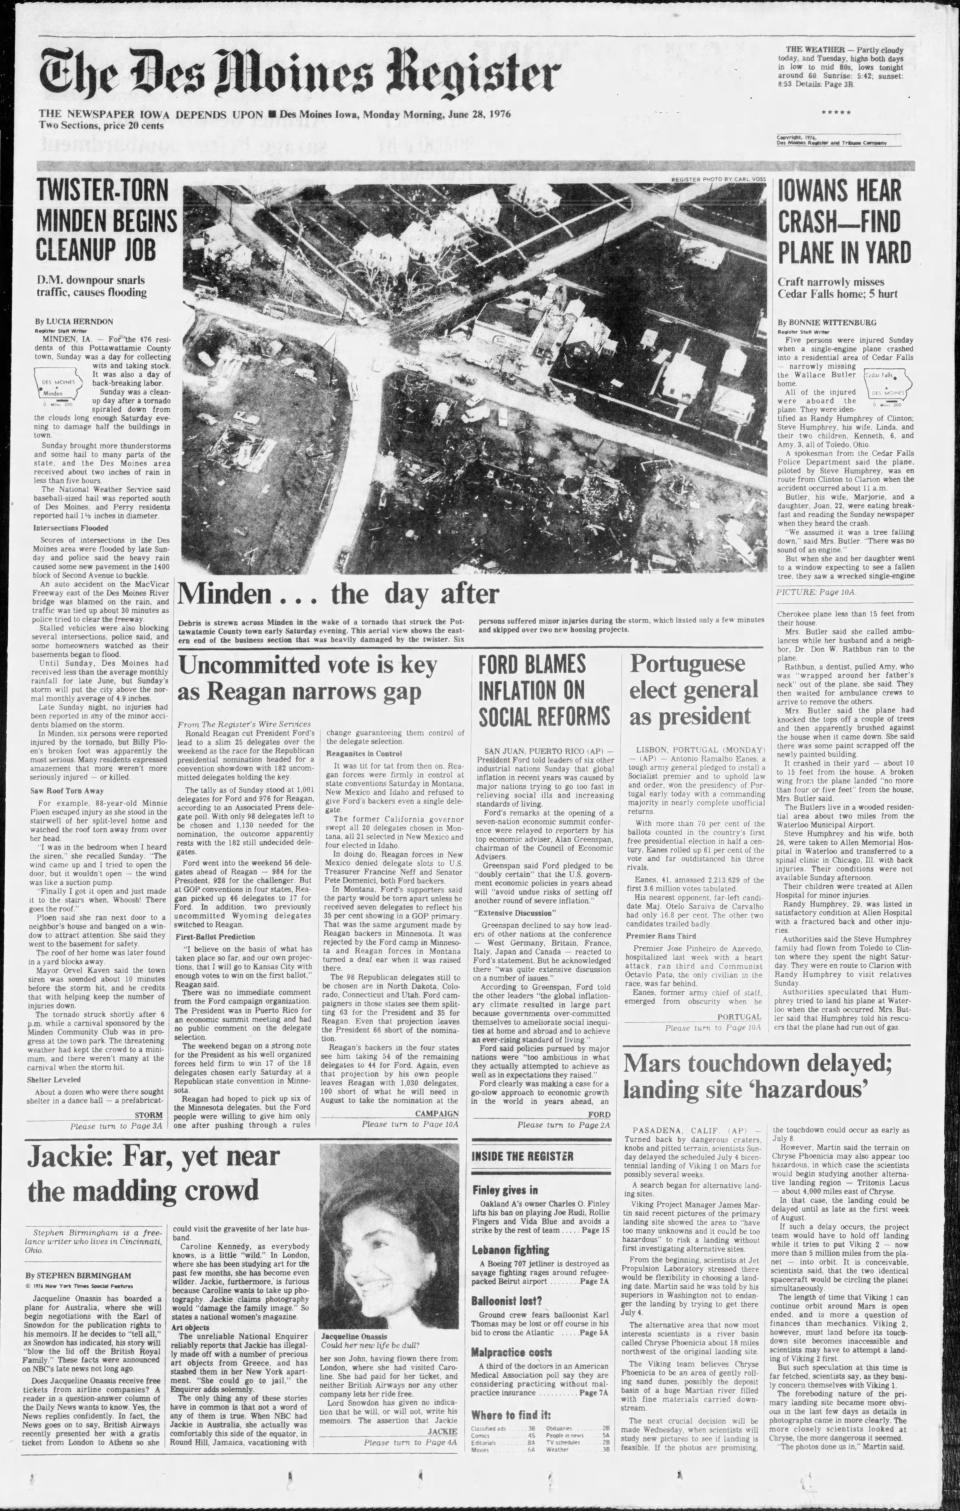 A June 1976 edition of the Des Moines Register reports on Minden's recovery effort after a devastating tornado. The town was hit and severely damaged again in April 26 storms.